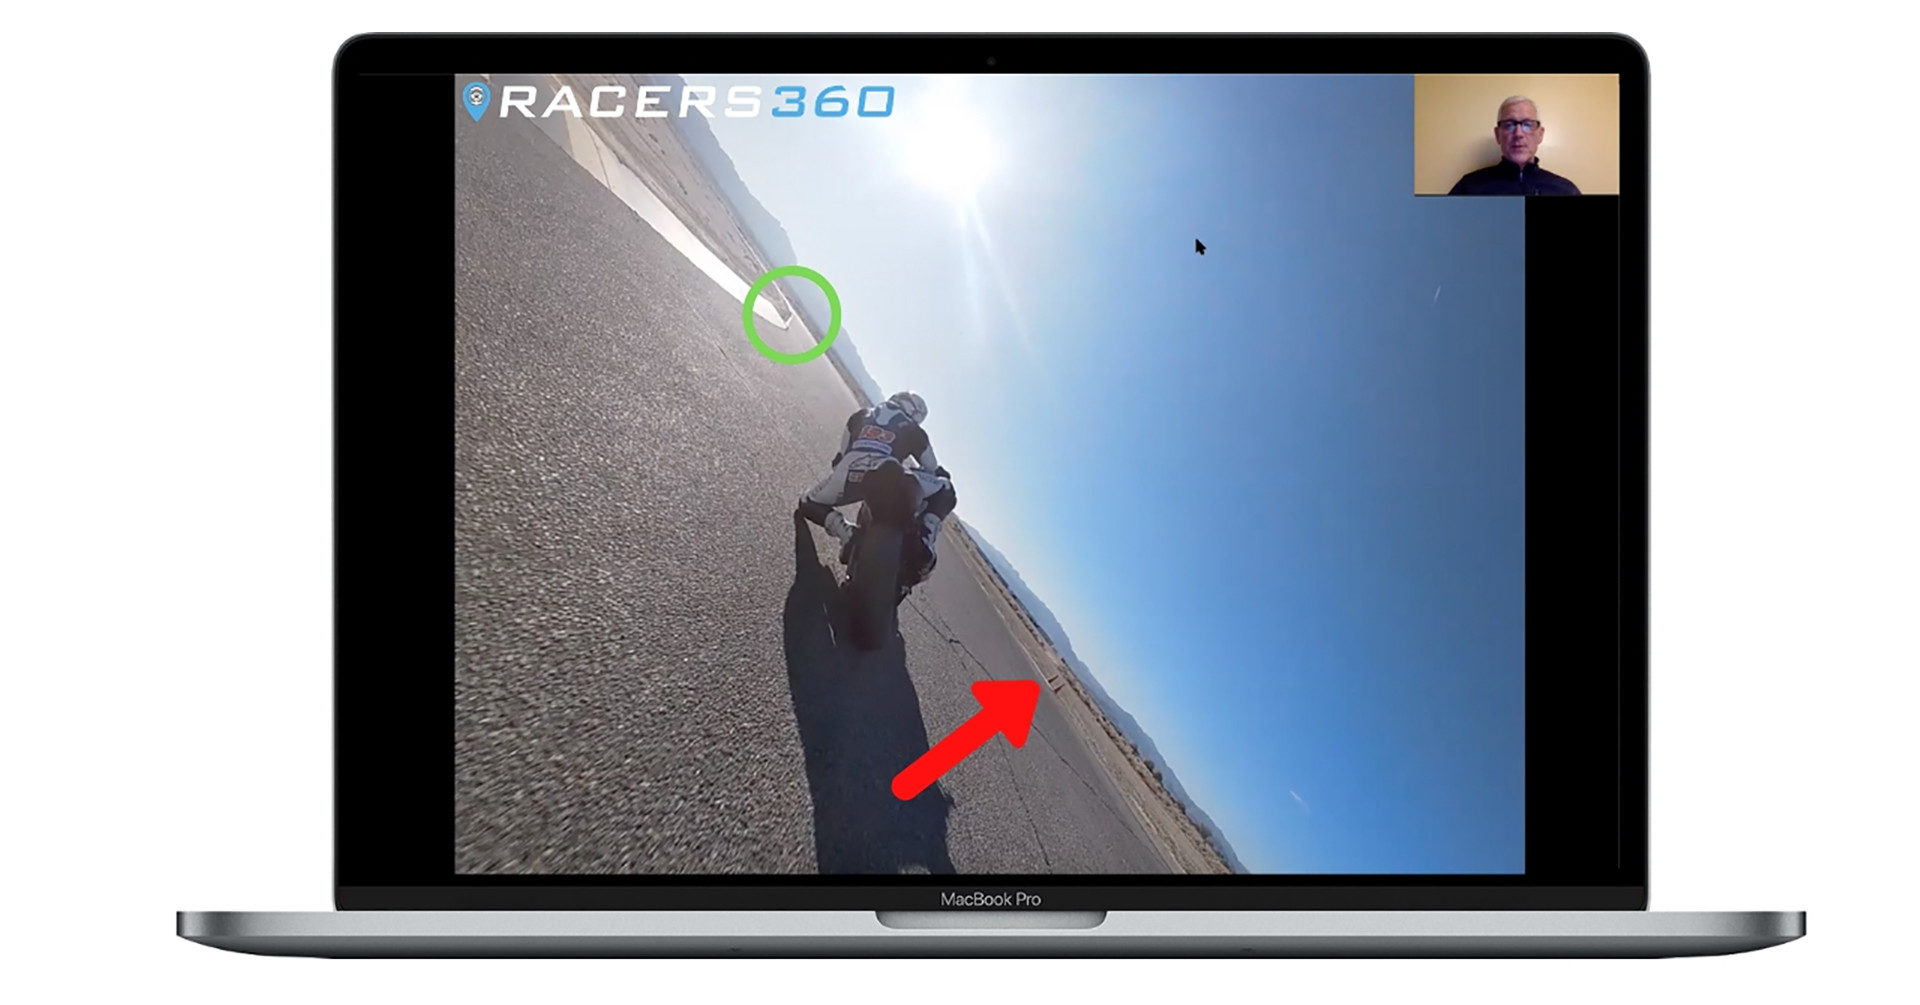 A screen shot of what Racer360 online coaching looks like. Image courtesy of Racer360.